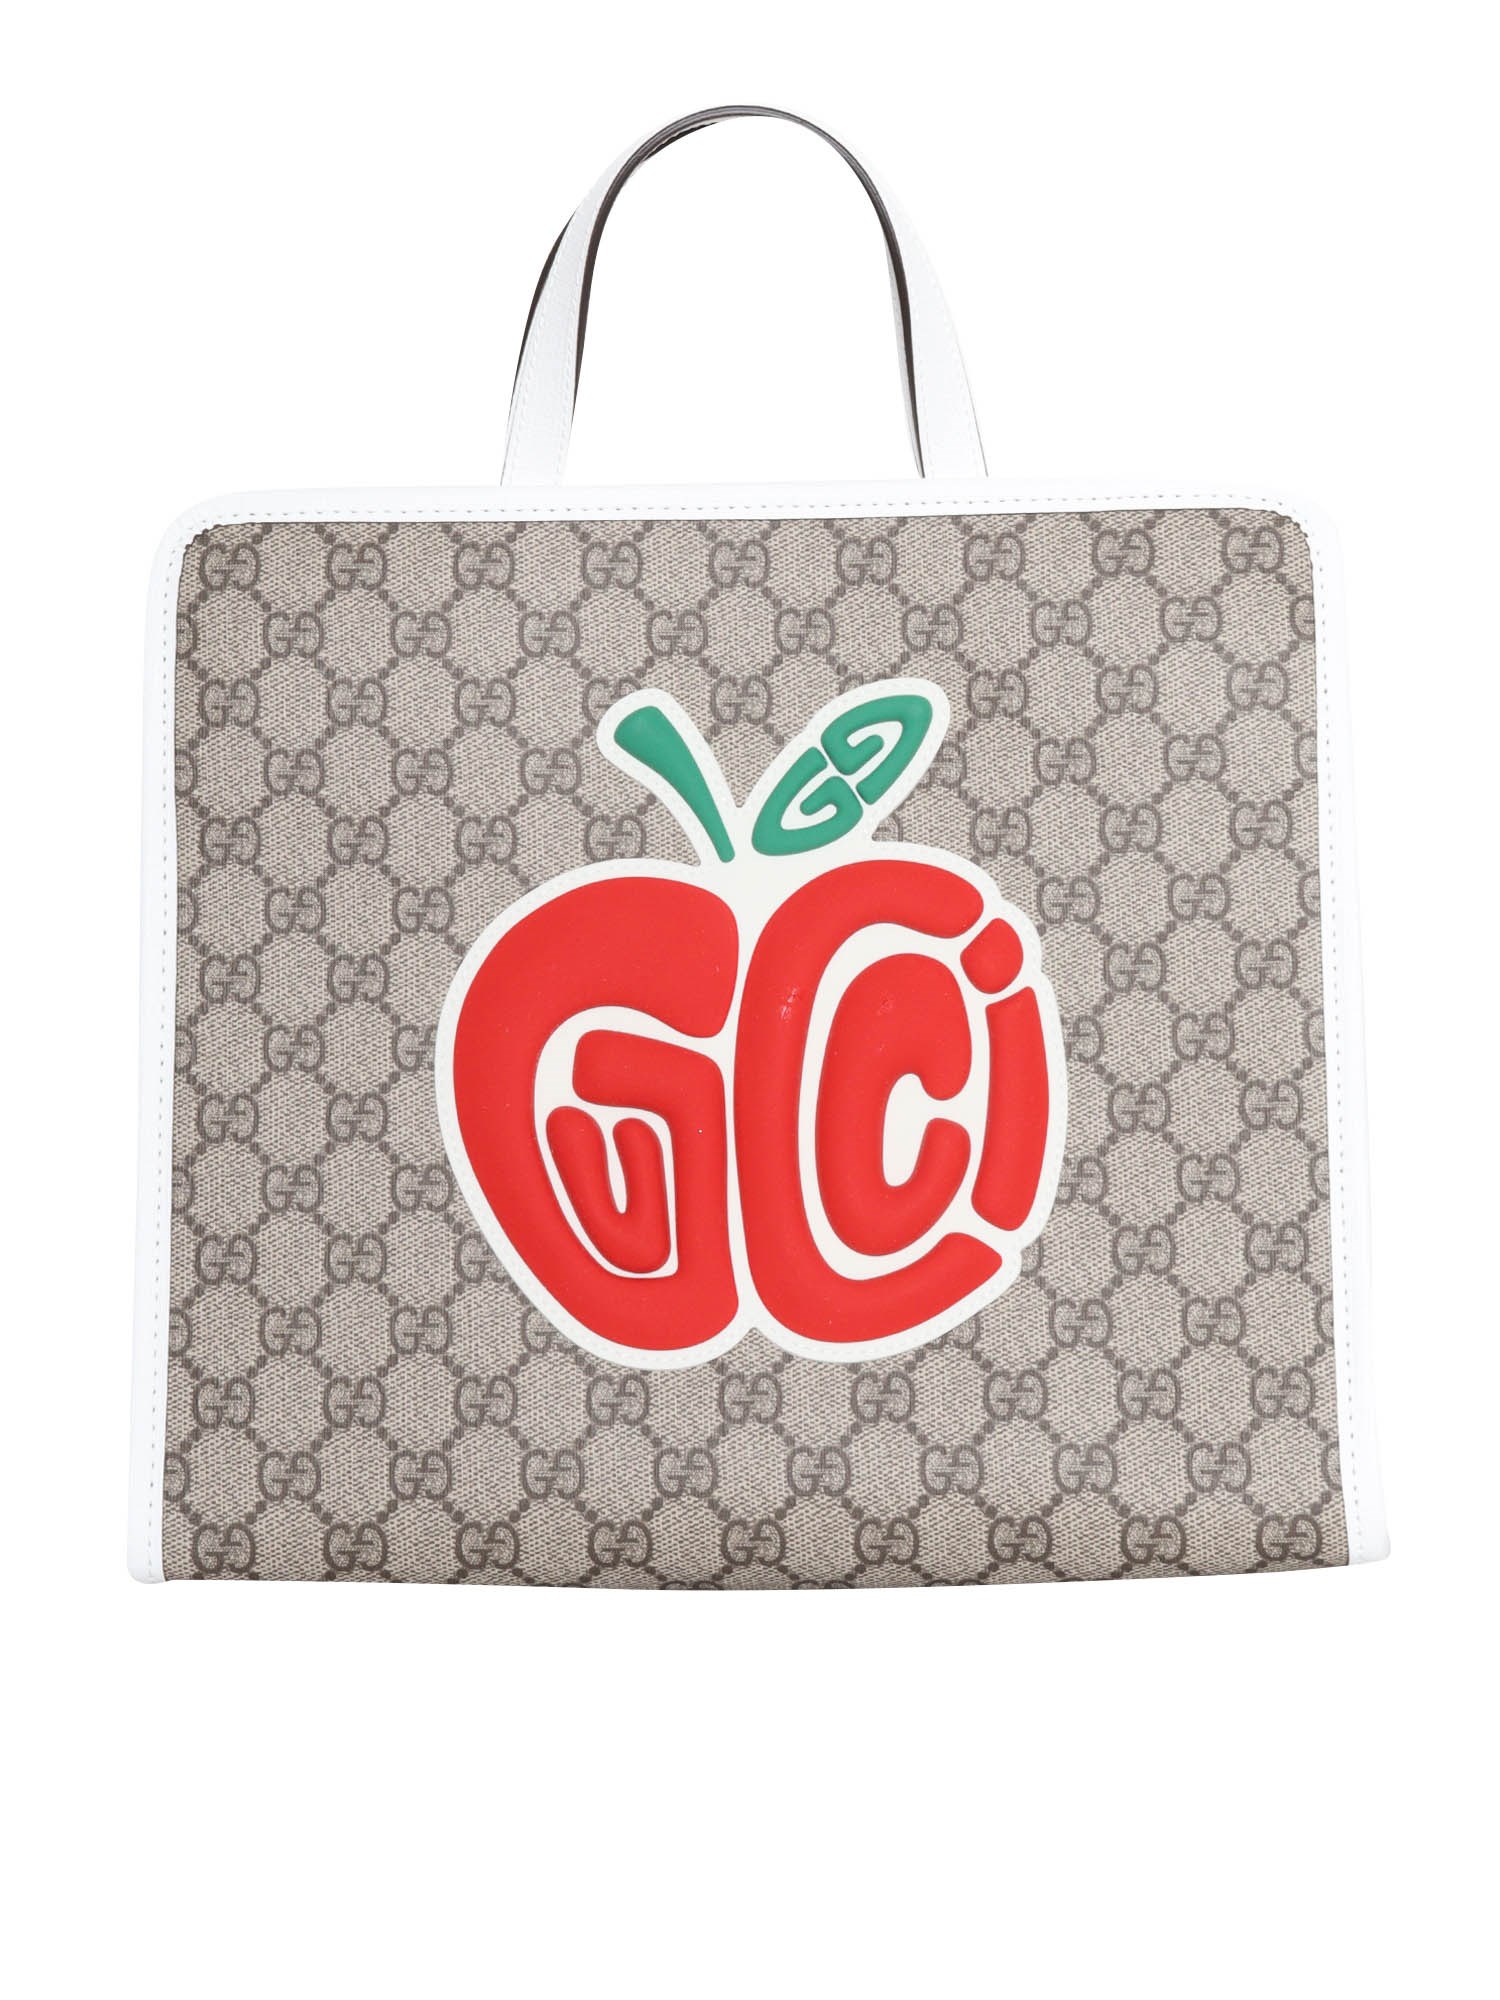 Gucci Gg Patch Tote Bag In Brown